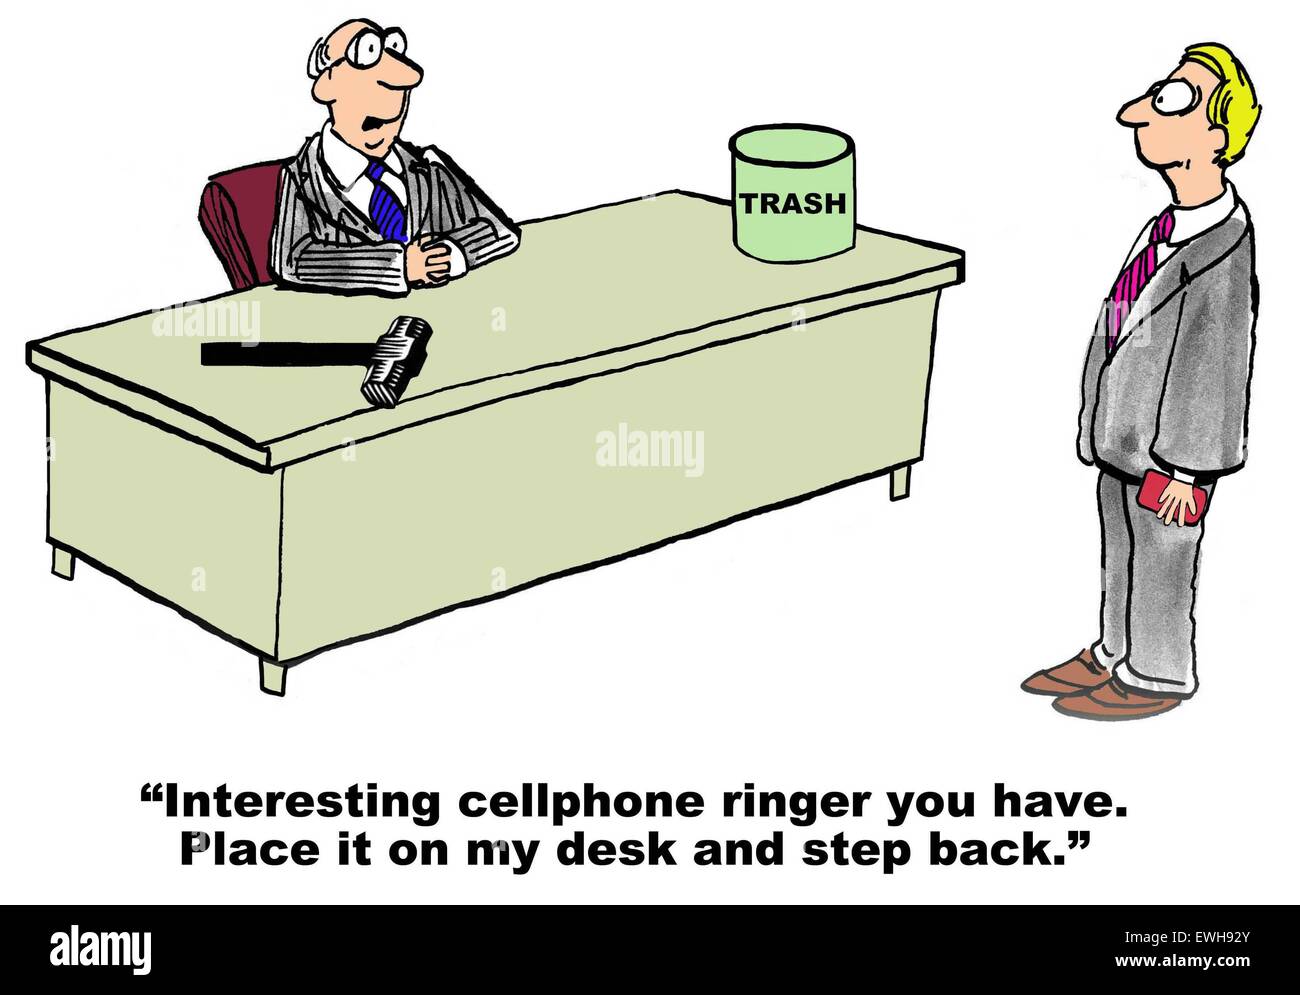 Business cartoon of boss and manager with phone, boss says, 'interesting cellphone ringer... place it on my desk, step back.' Stock Photo